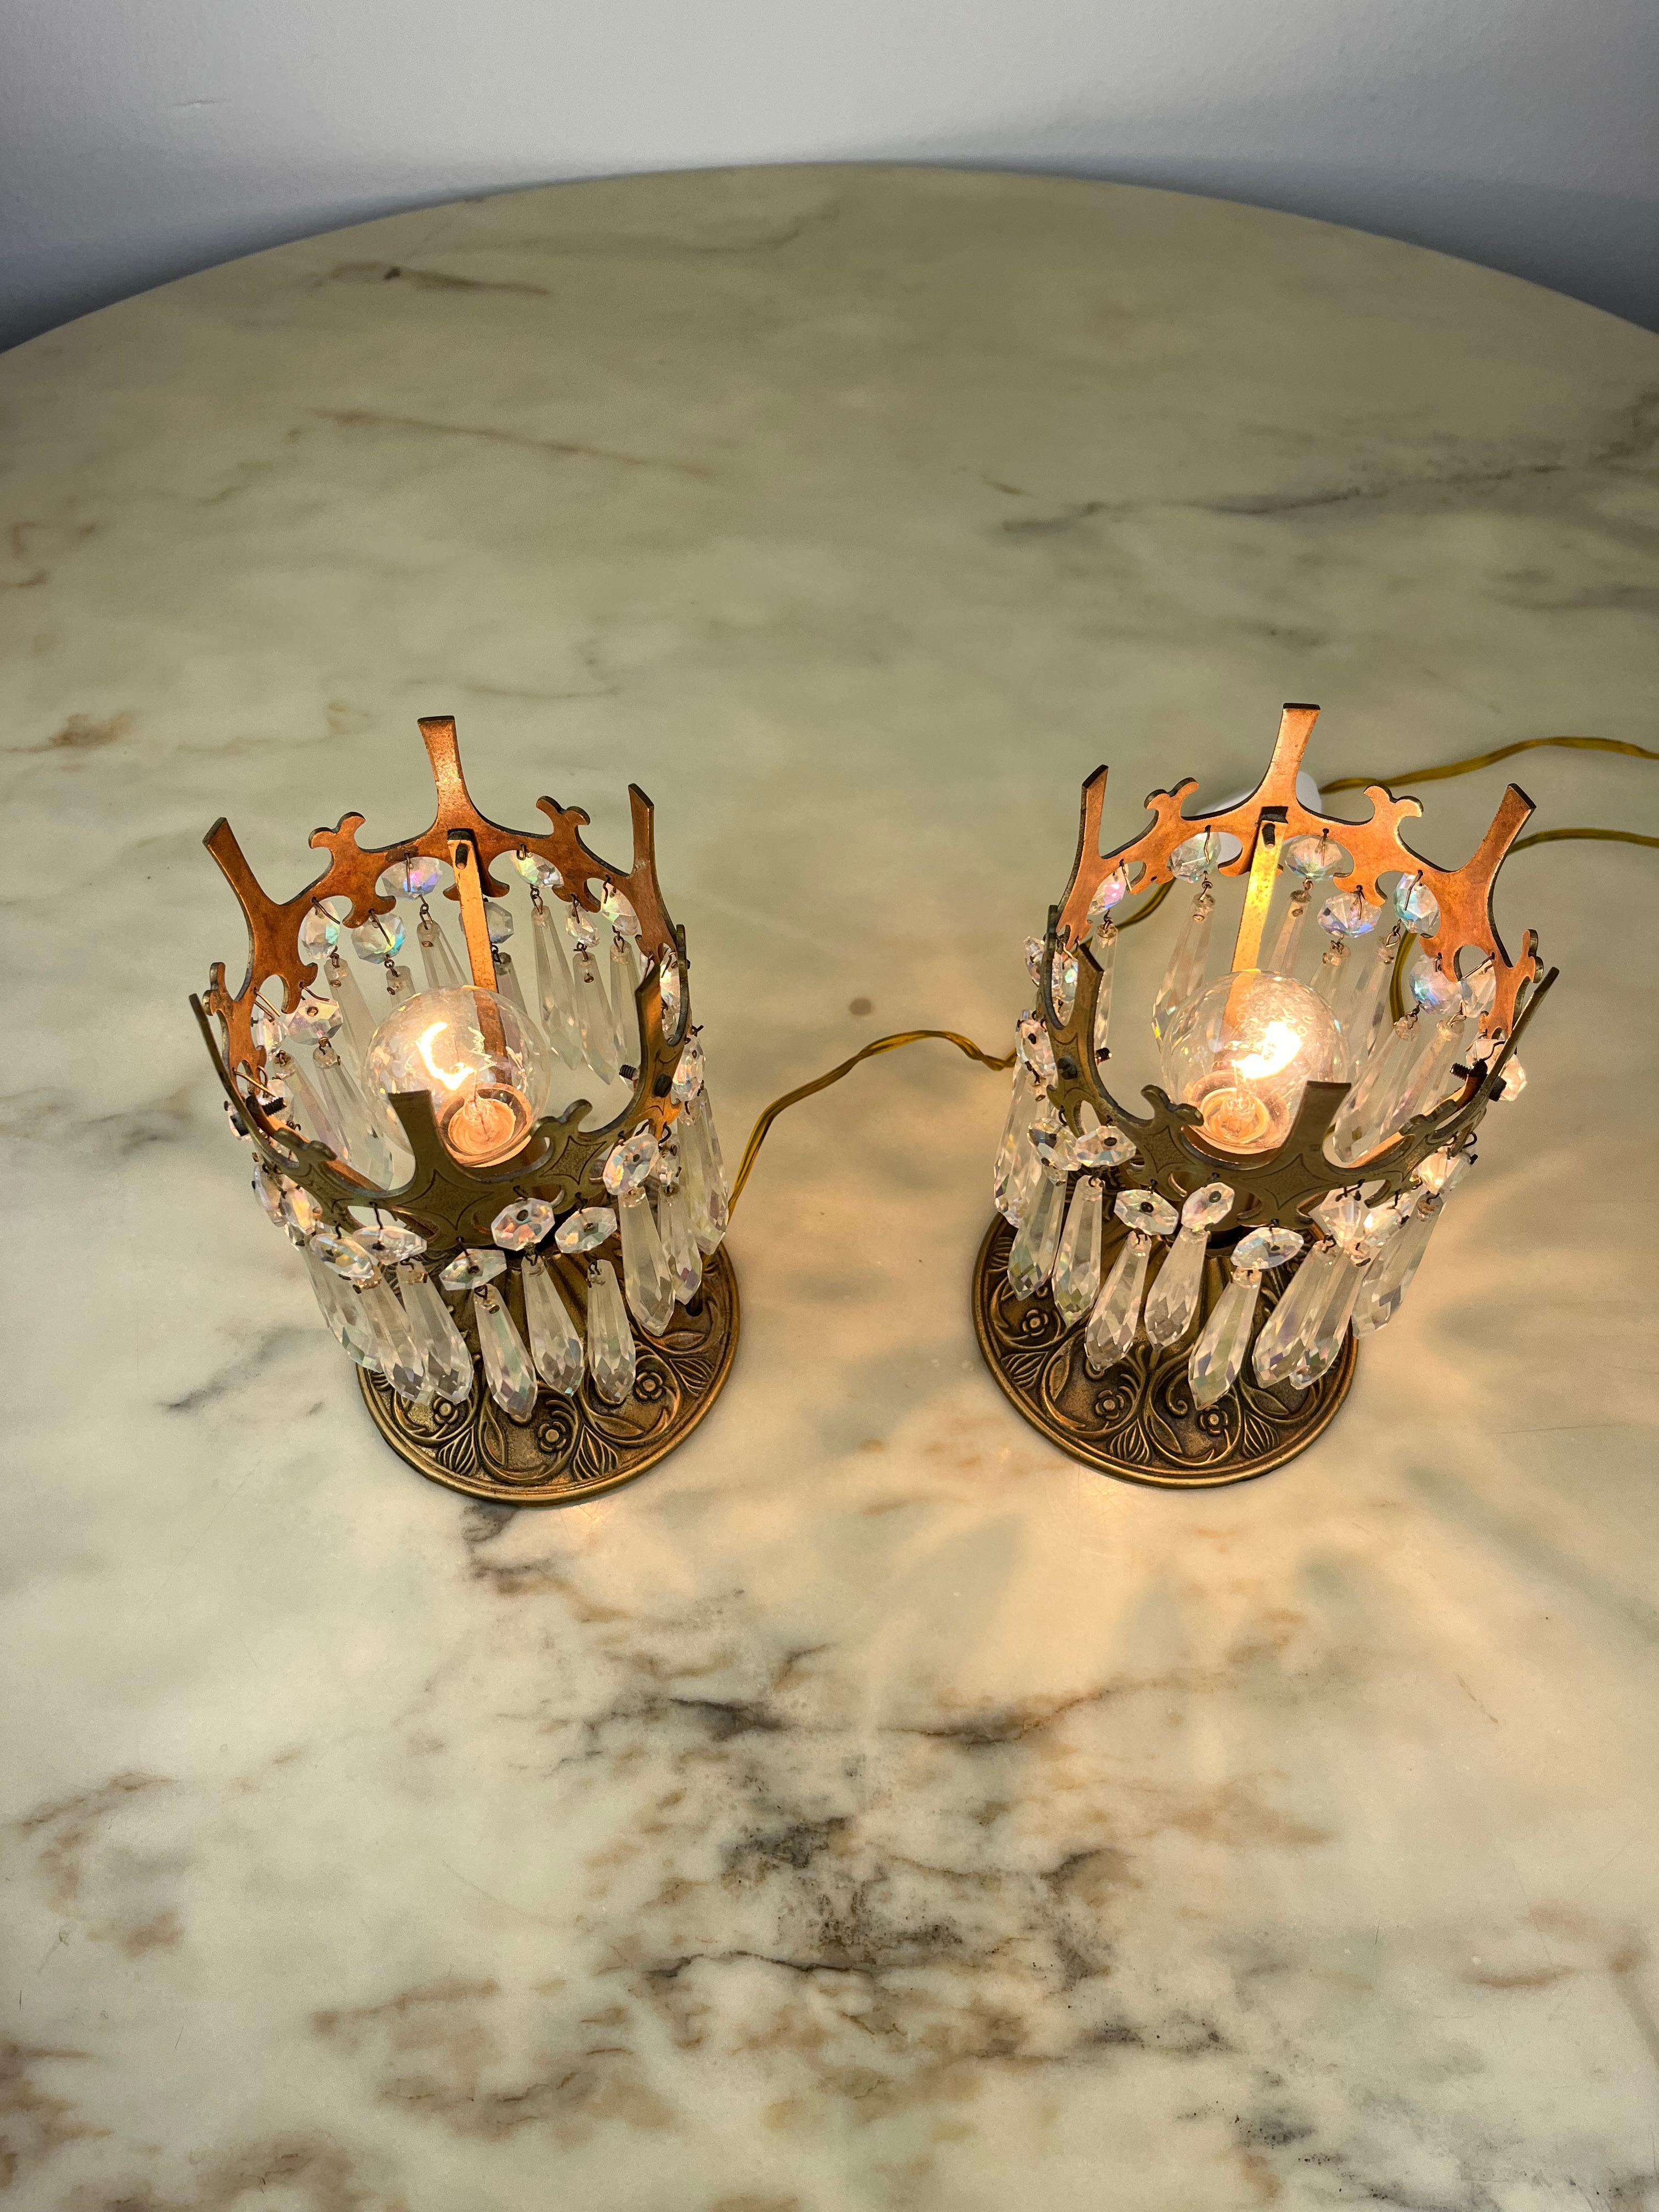 Pair of bronze and crystal bedside lamps, Italy, 1960s.
Belonged to my great-grandparents, they are functional. Signs of time and use.